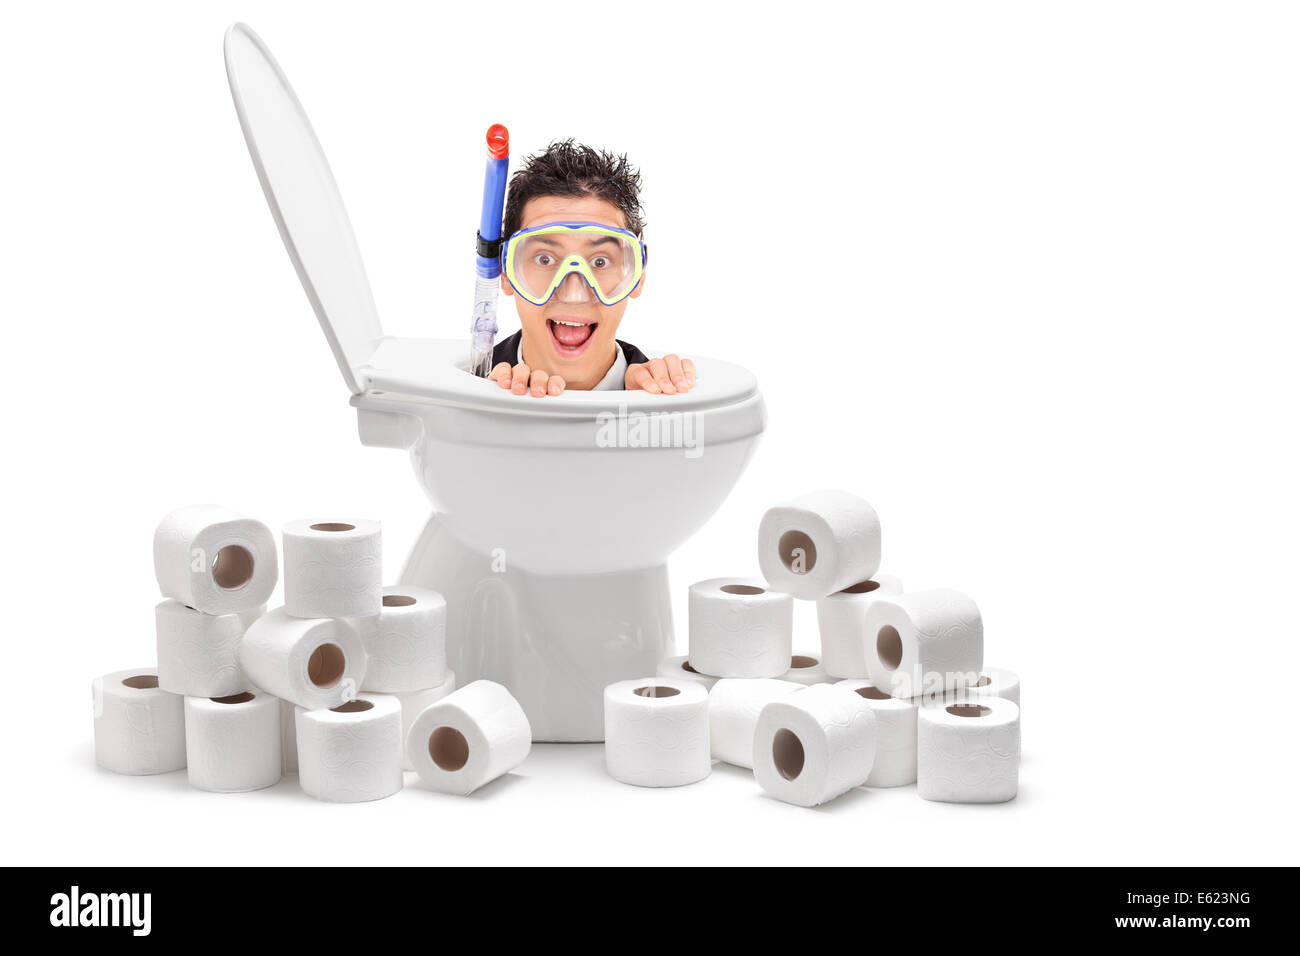 Man with diving mask emerging from a toilet with toilet paper around him Stock Photo